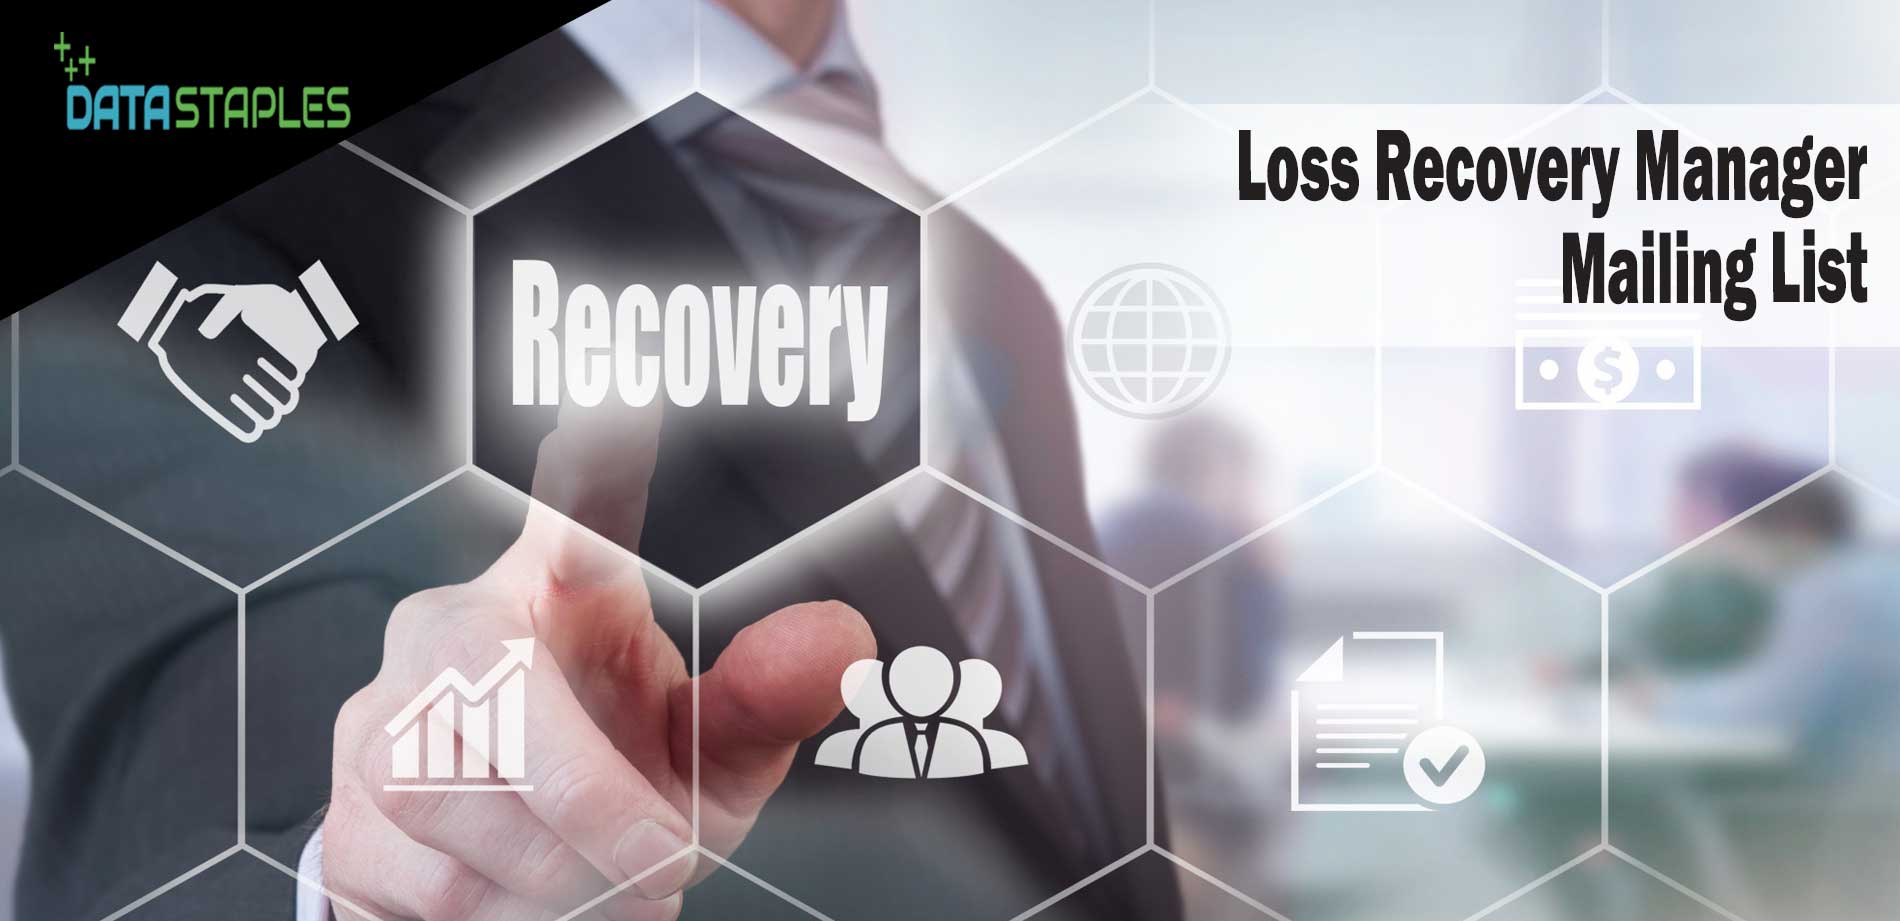 Loss Recovery Manager Mailing List | DataStaples